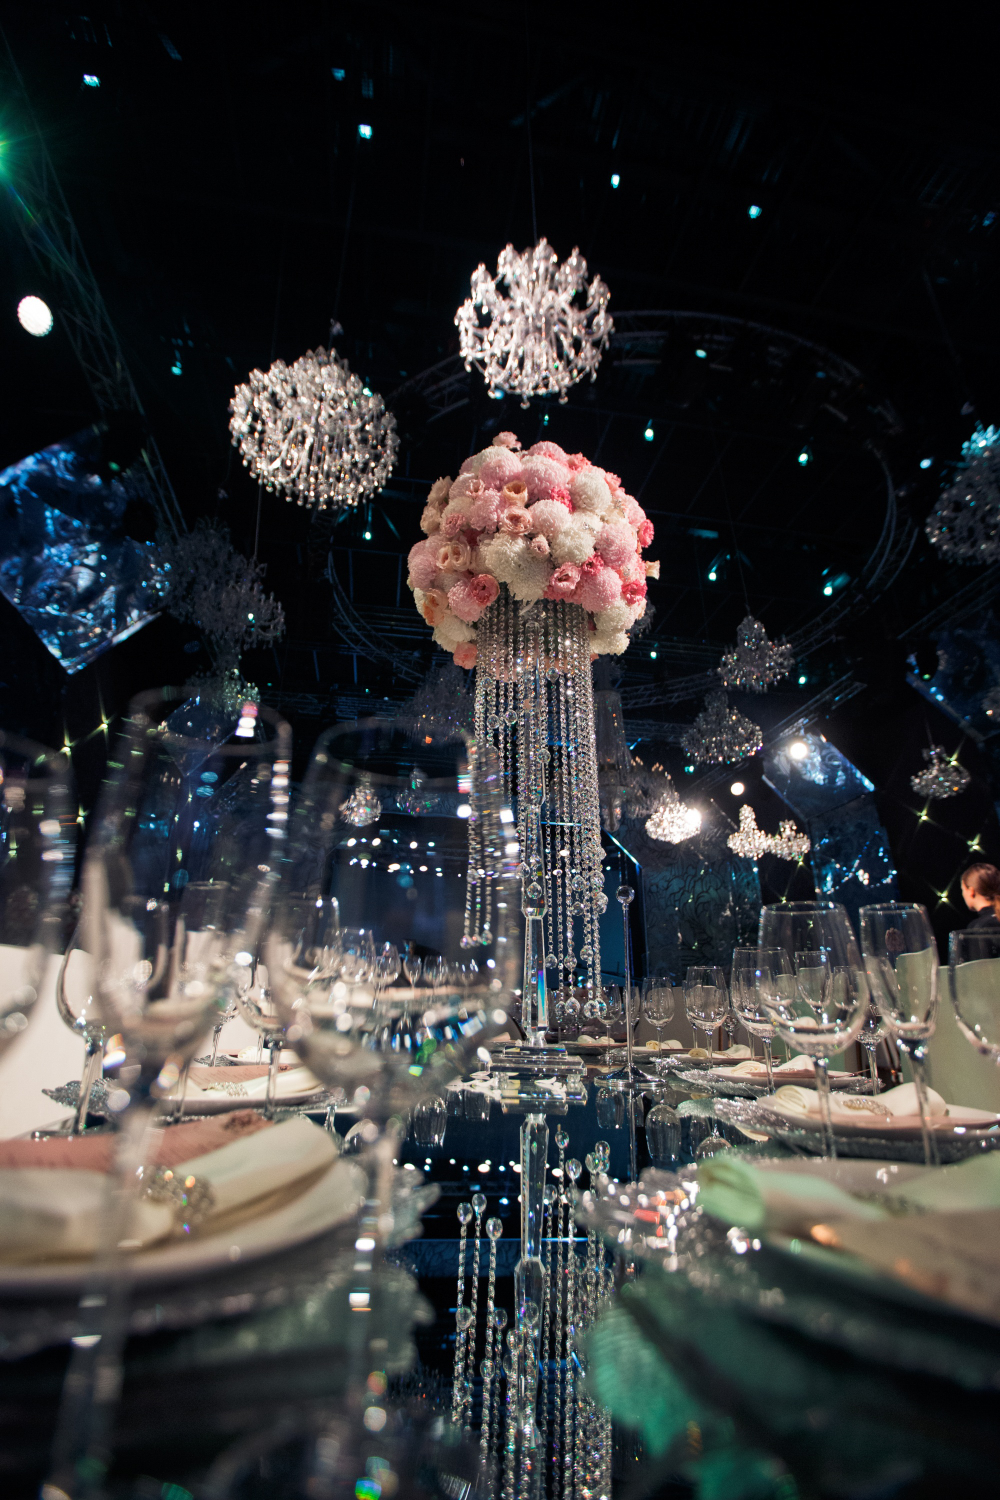 tall-centrepiece-made-pink-flowers-crystal-chains-stands-dinner-table